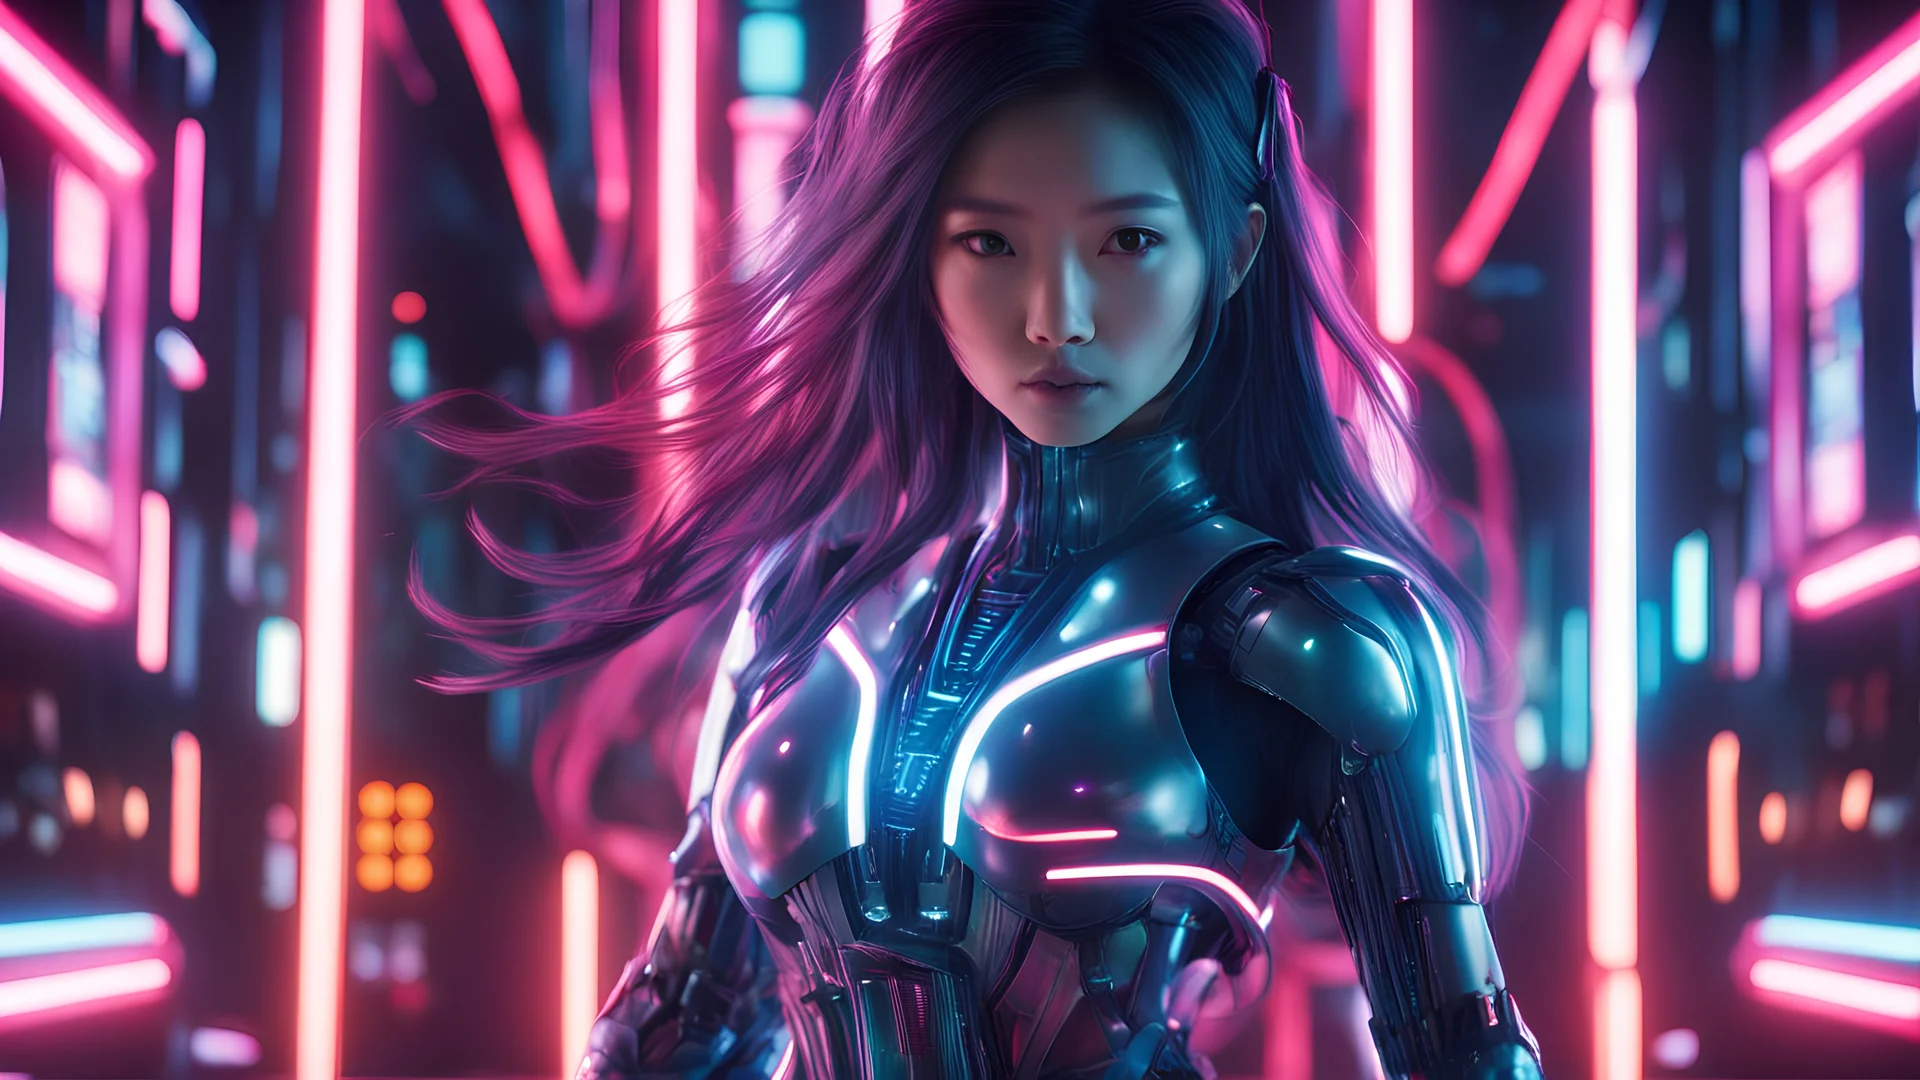 high quality, 8K Ultra HD, full body, possesses a cyber-saber, a fascinating 20-year-old Japanese woman with futuristic beauty who seems to transcend time and space, intimately woven into her very being, enclosed in the cybernetic suit, moves fluidly and precisely, Her flowing hair resembles streams of neon lights, casting a vibrant glow that adds a touch of cyberpunk sparkle to her appearance, Each strand of hair is meticulously crafted with holographic patterns that shimmer and change, creatin